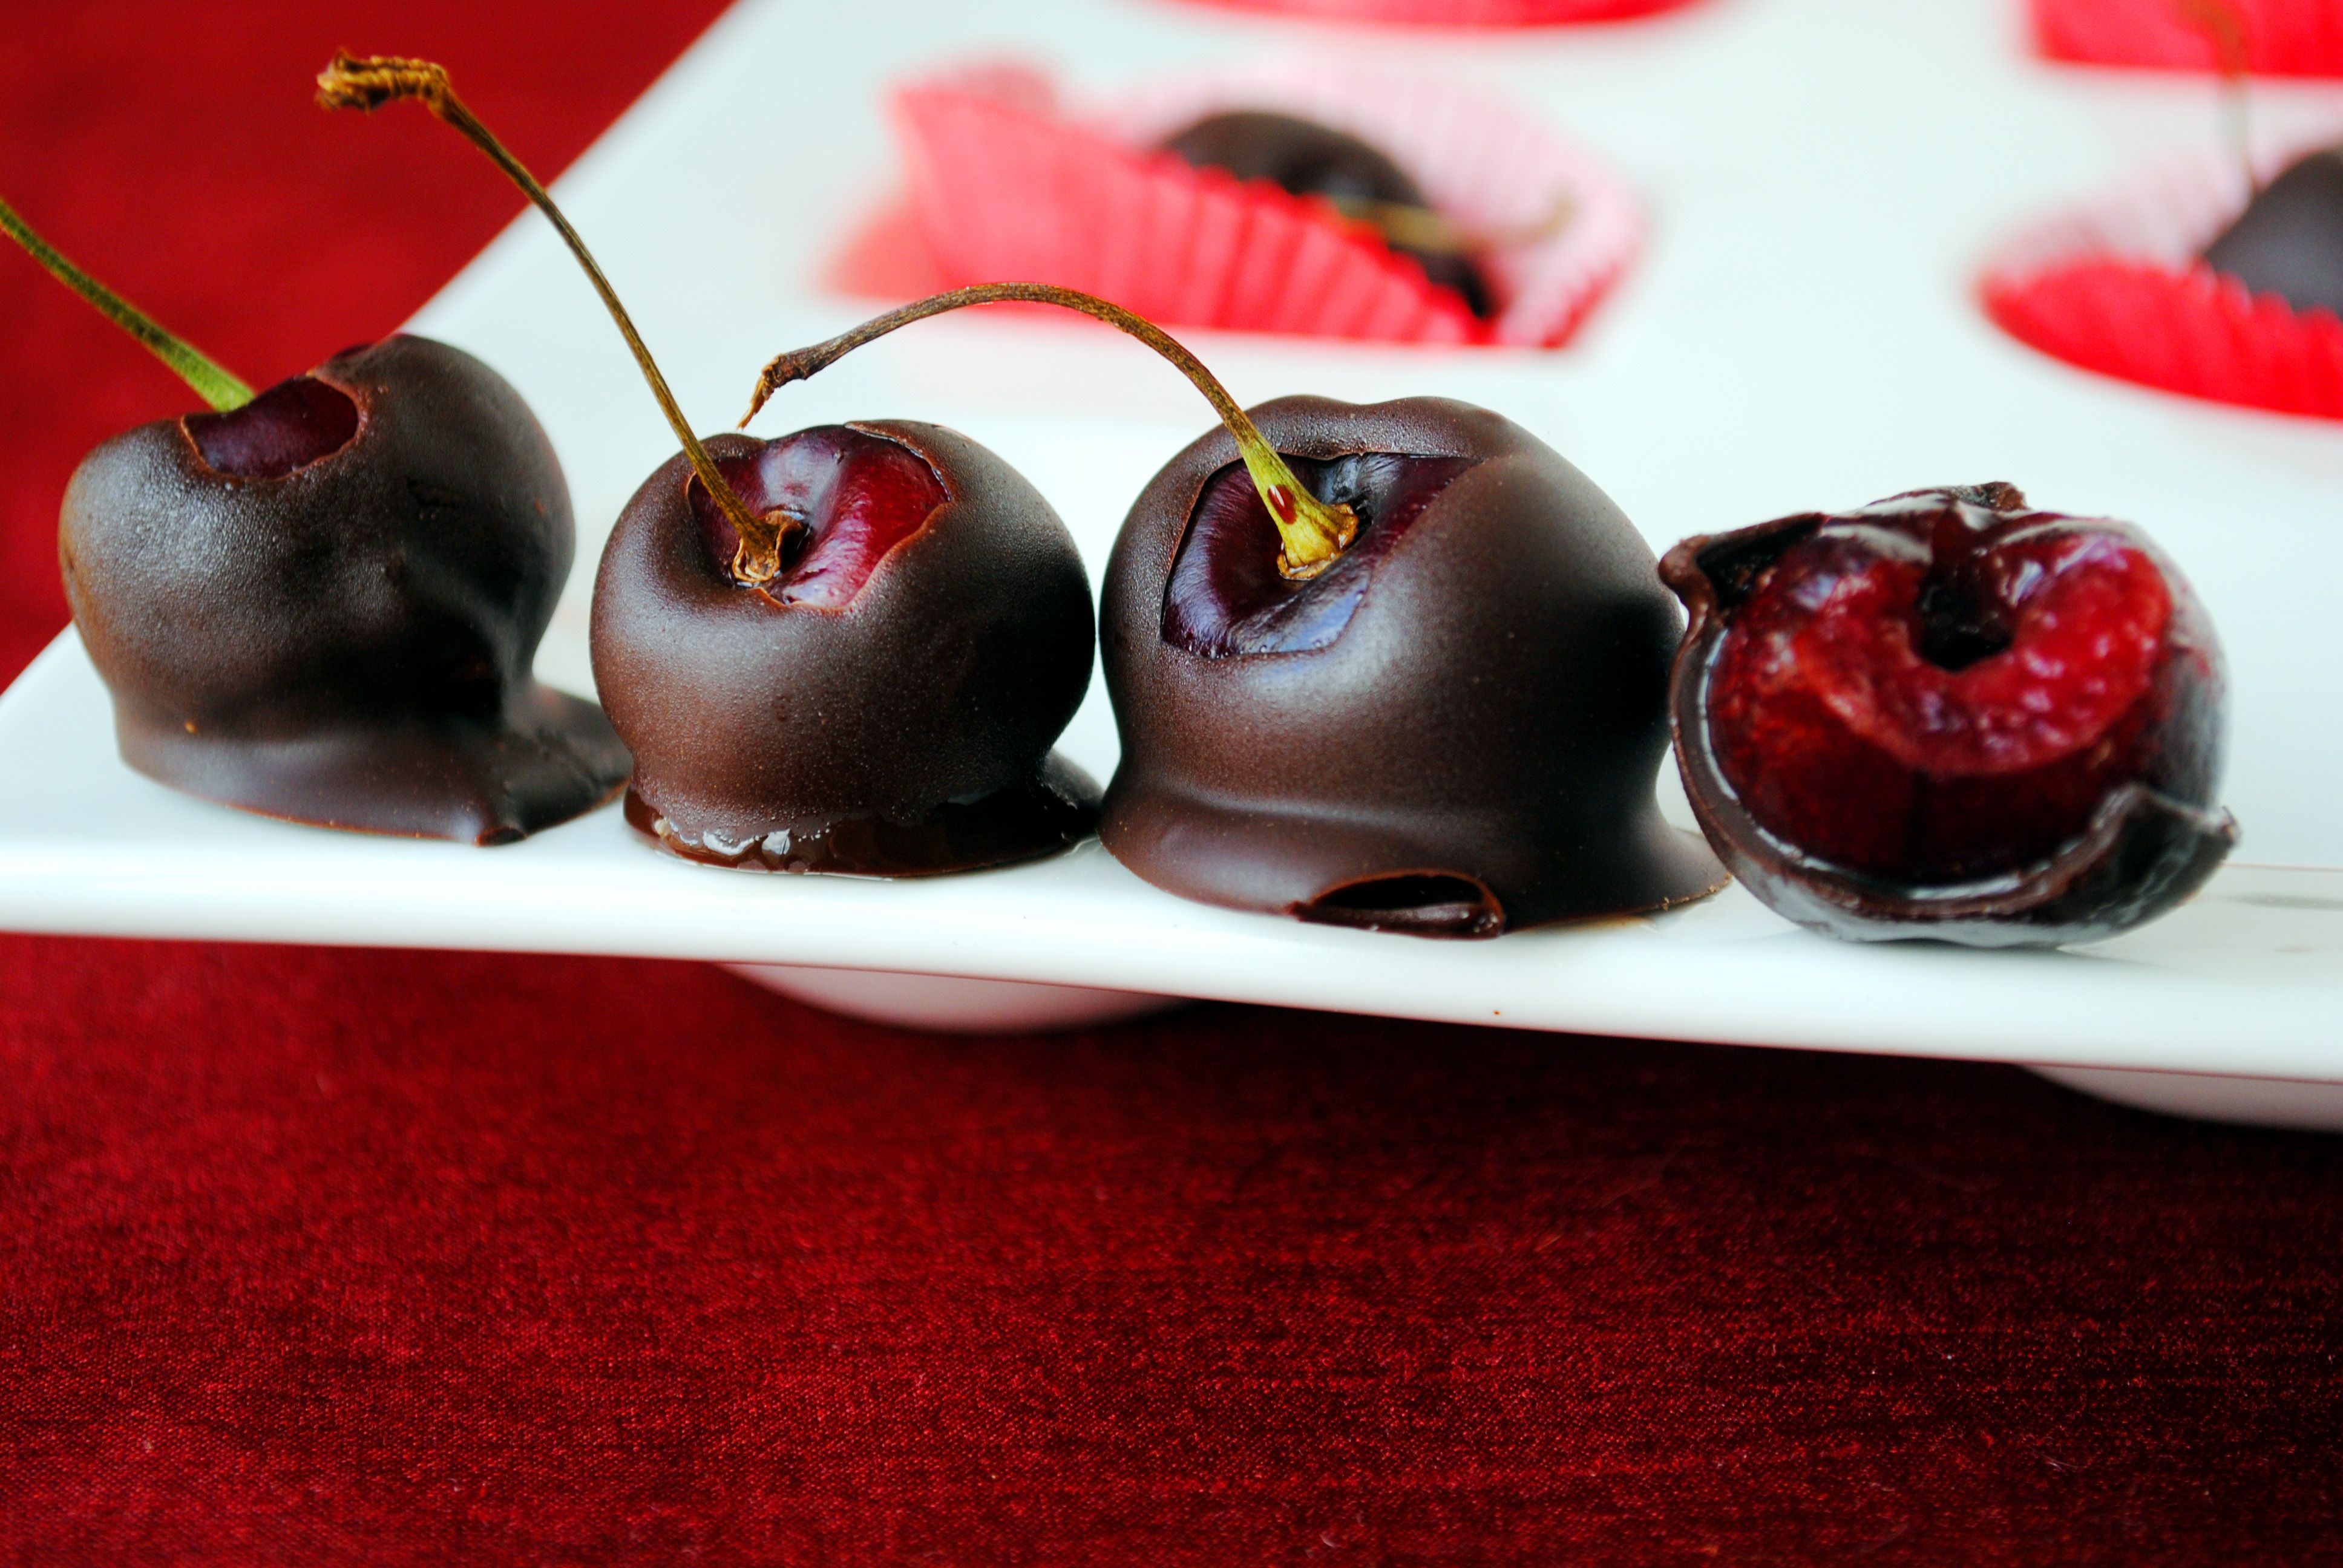 January 3 is National Chocolate Covered Cherry Day. Foodimentary